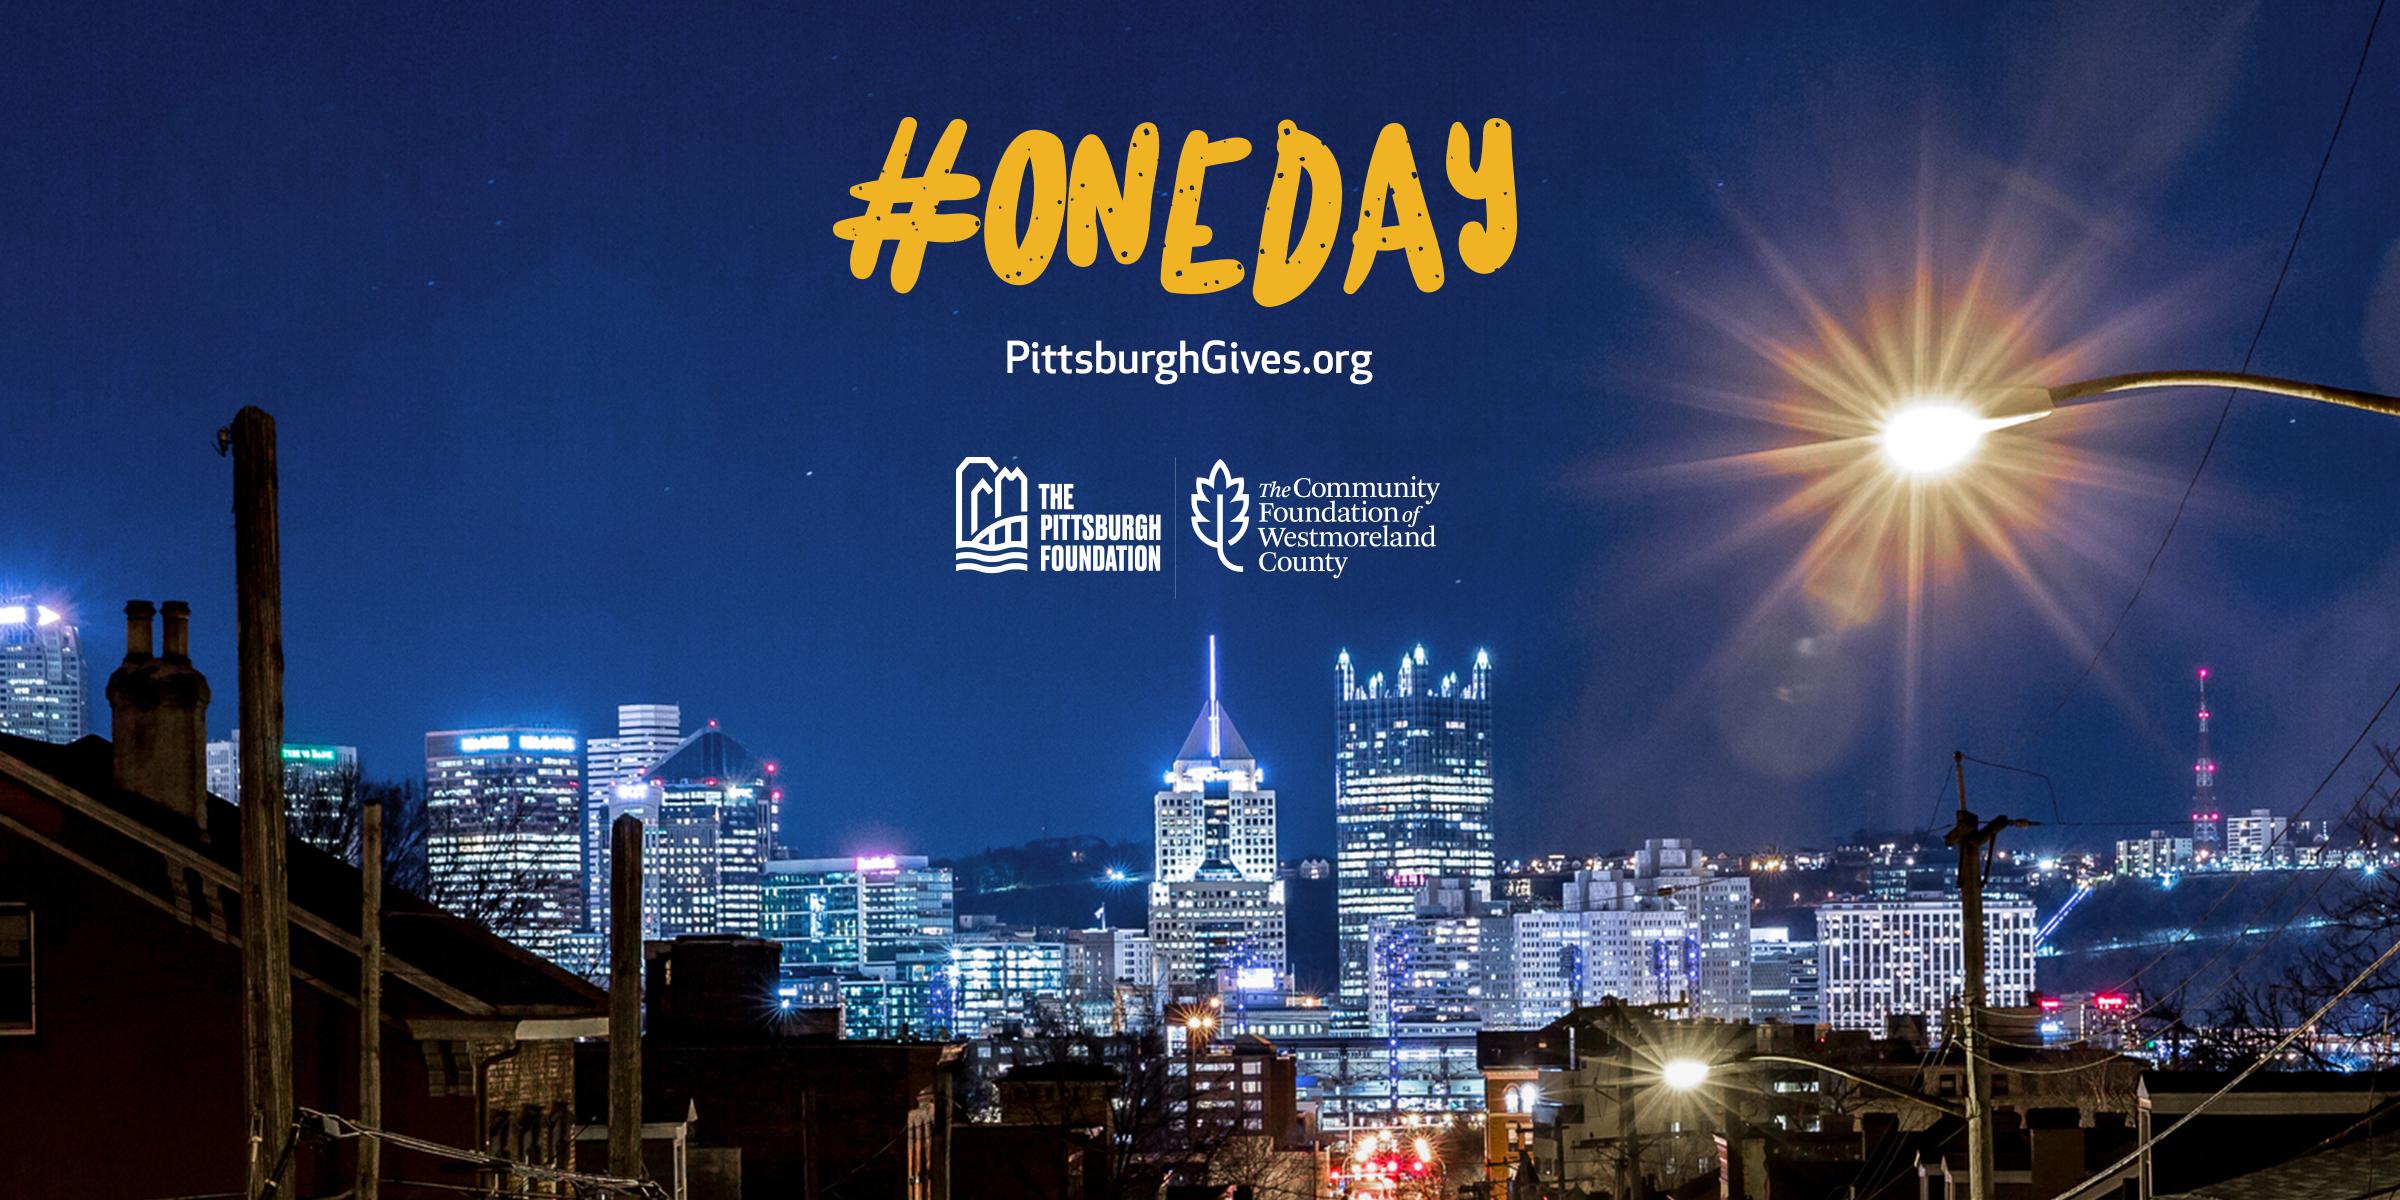 #ONEDAY Critical Needs Alert at pittsburghgives.org.